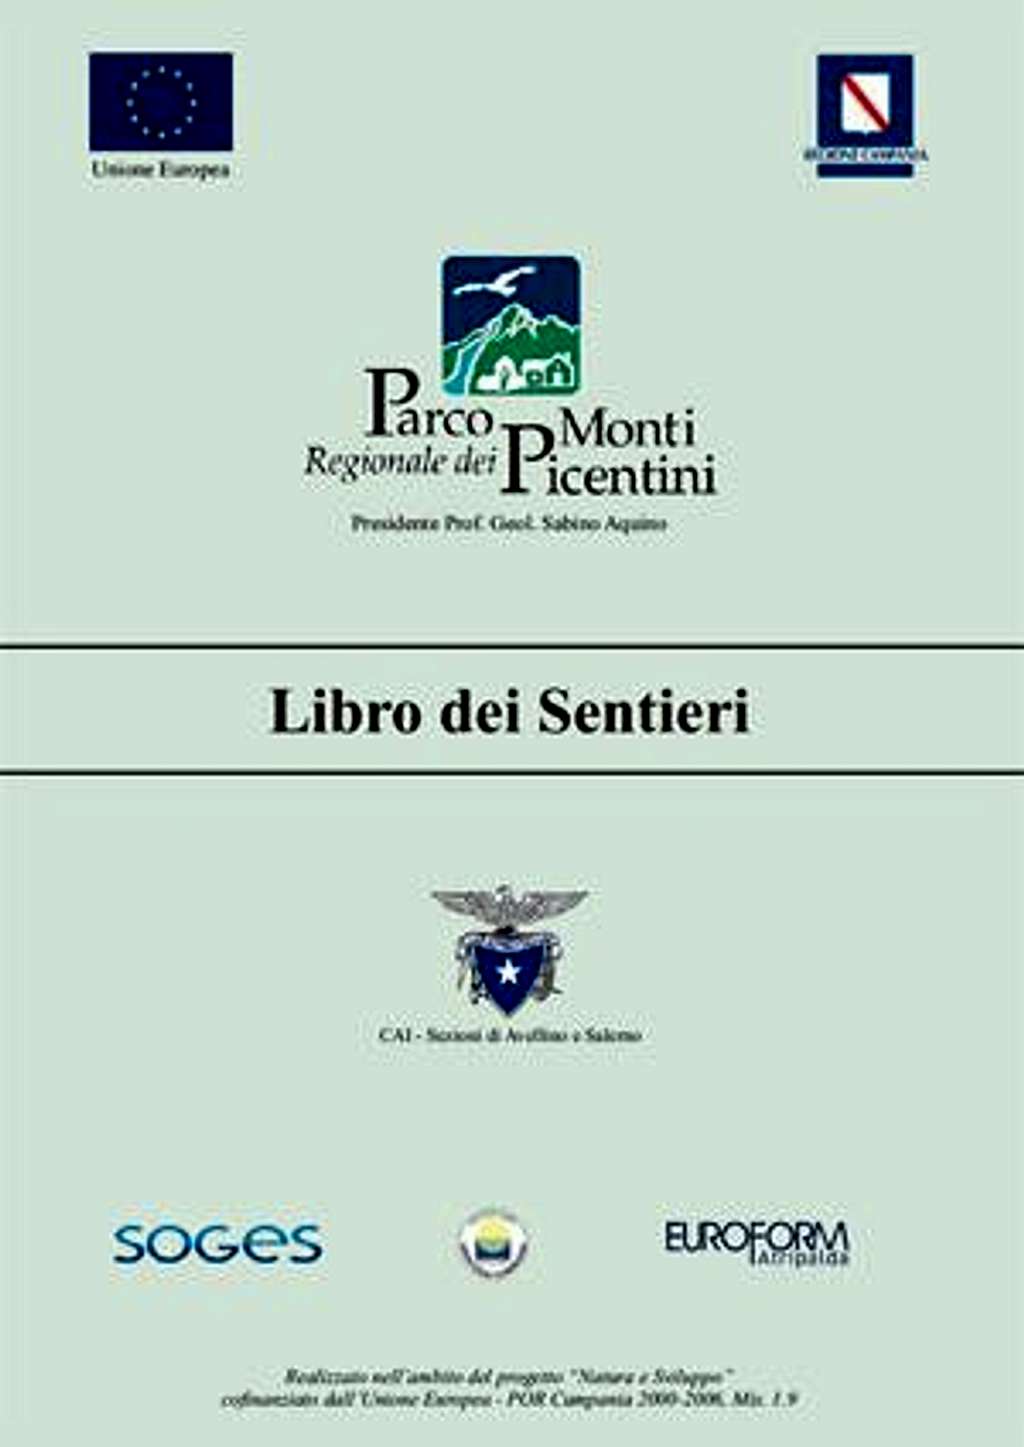 Book in PDF format of paths of the Park